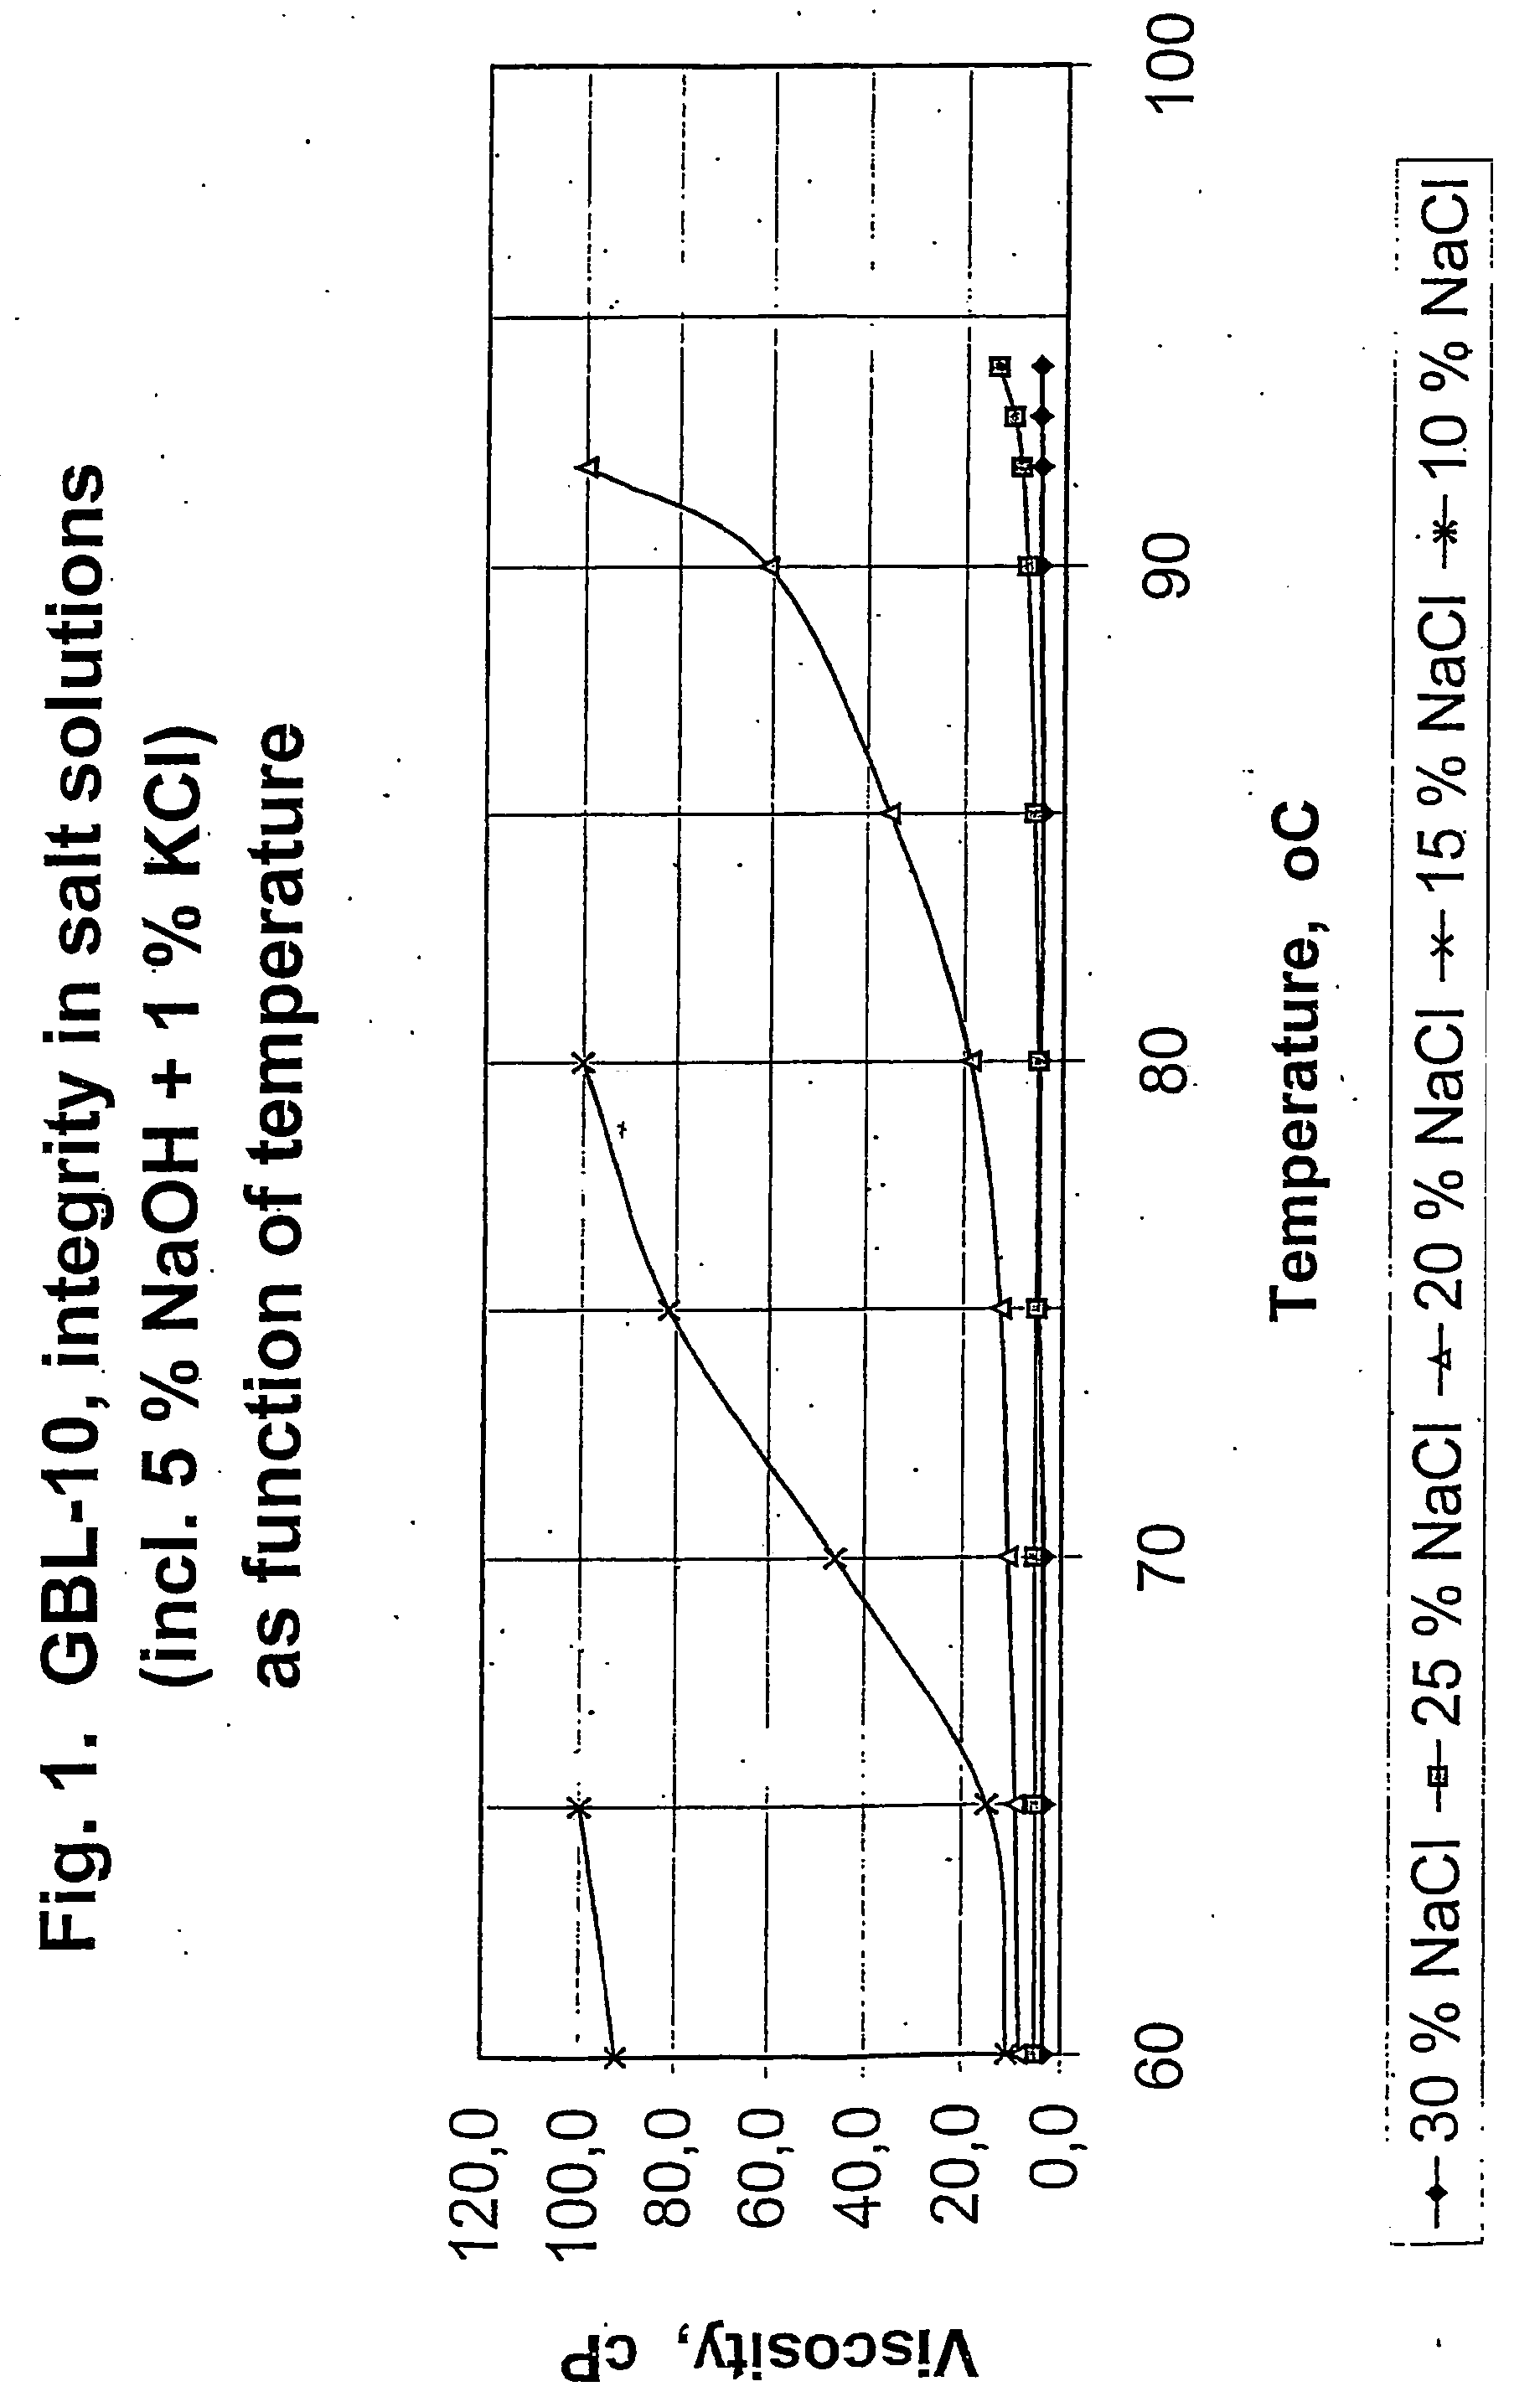 Method for manufacturing and fractionating gelling and non-gelling carrageenans from bi-component seaweed